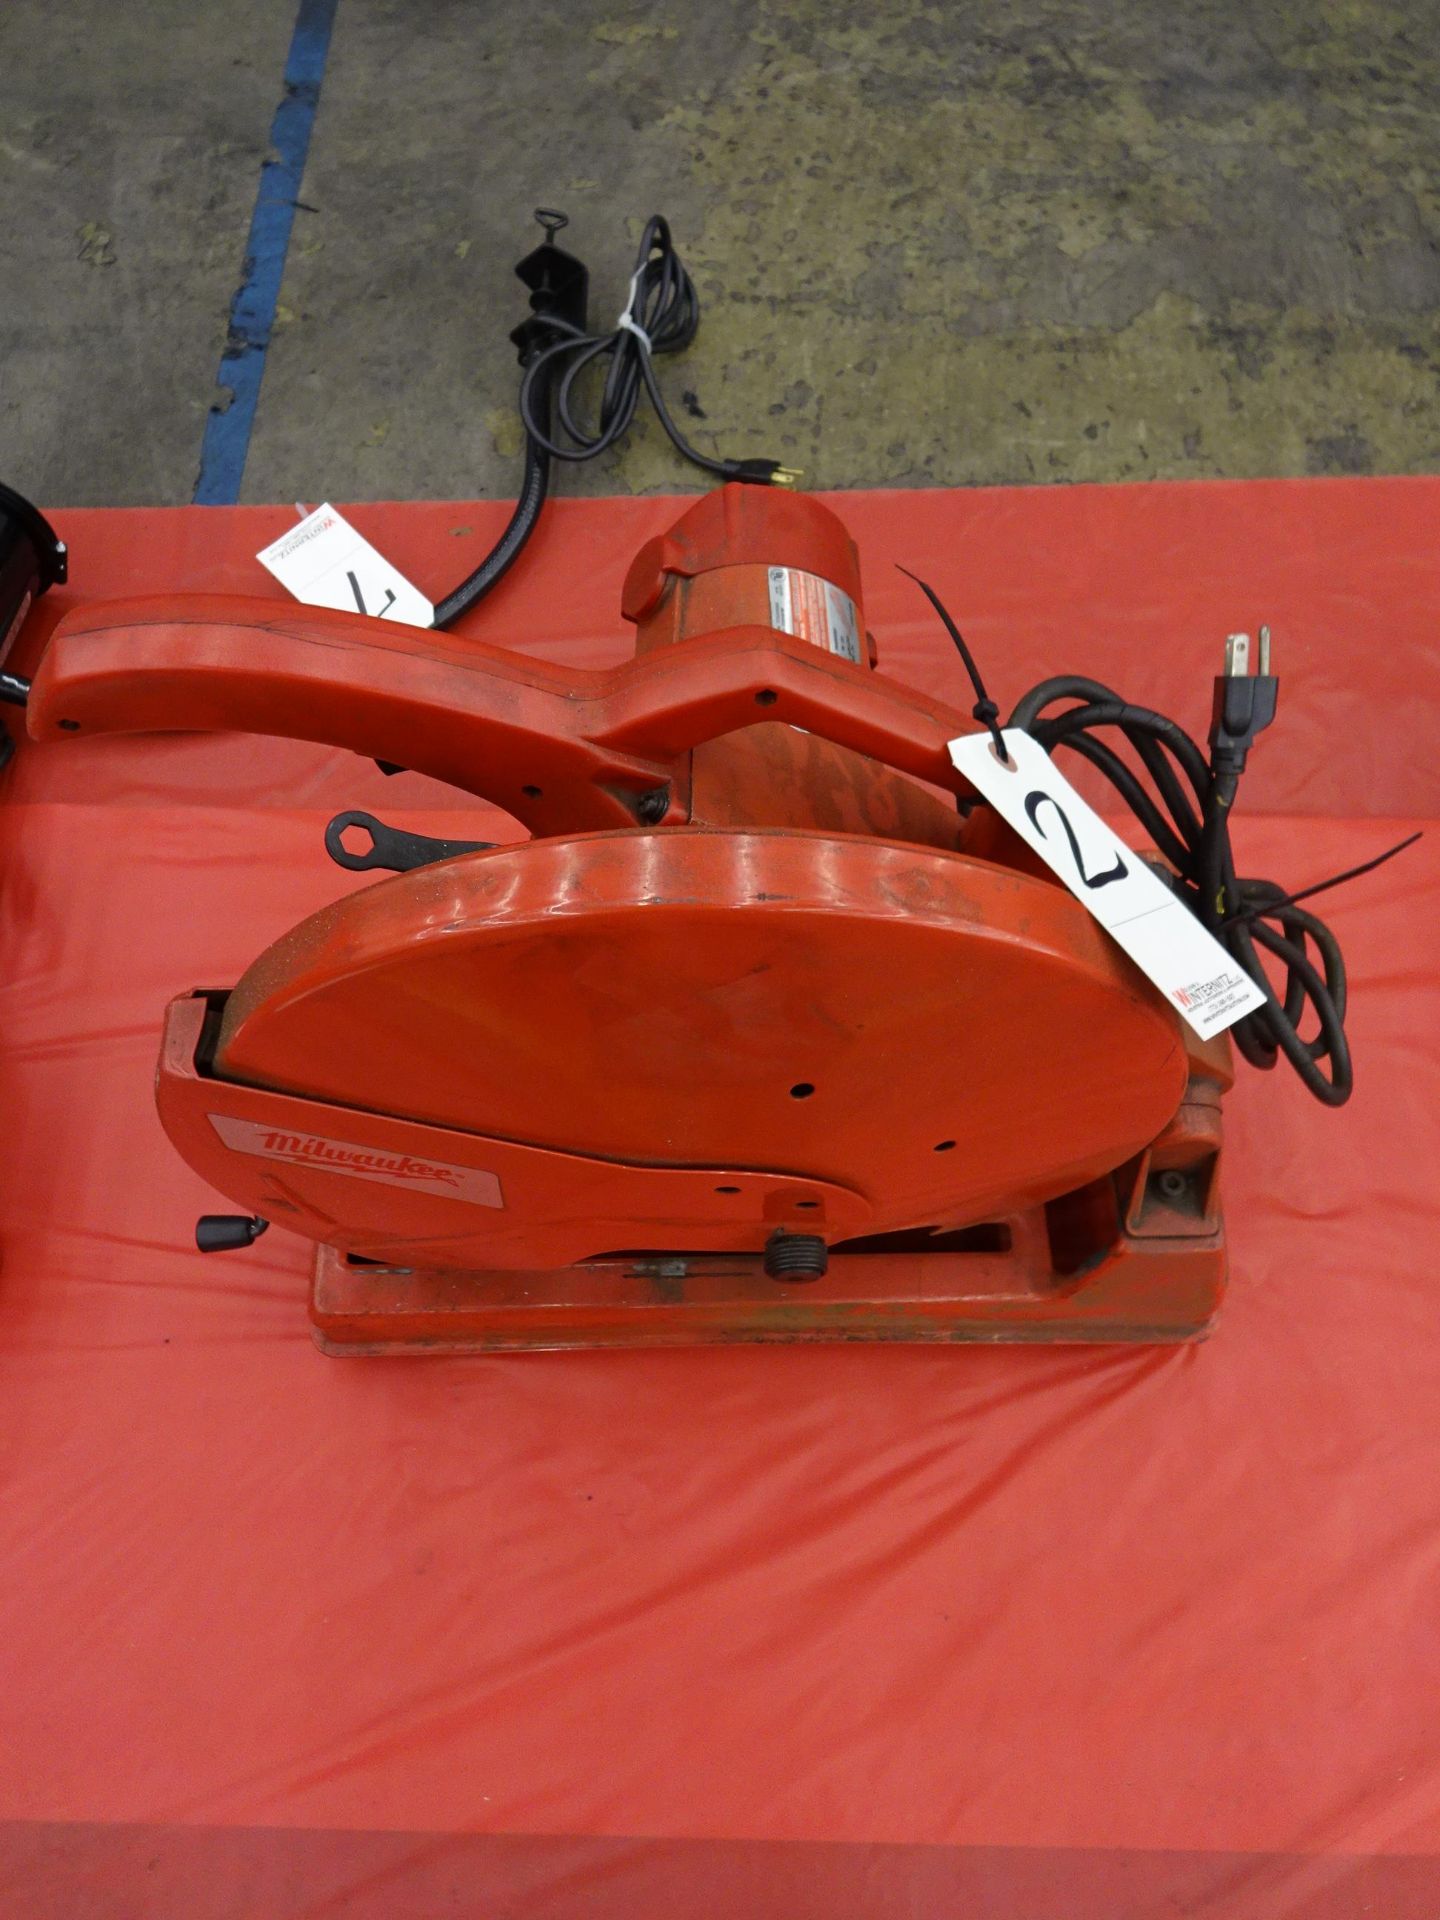 MILWAUKEE 14 IN. MODEL 6175 ABRASIVE CUT-OFF - Image 2 of 2